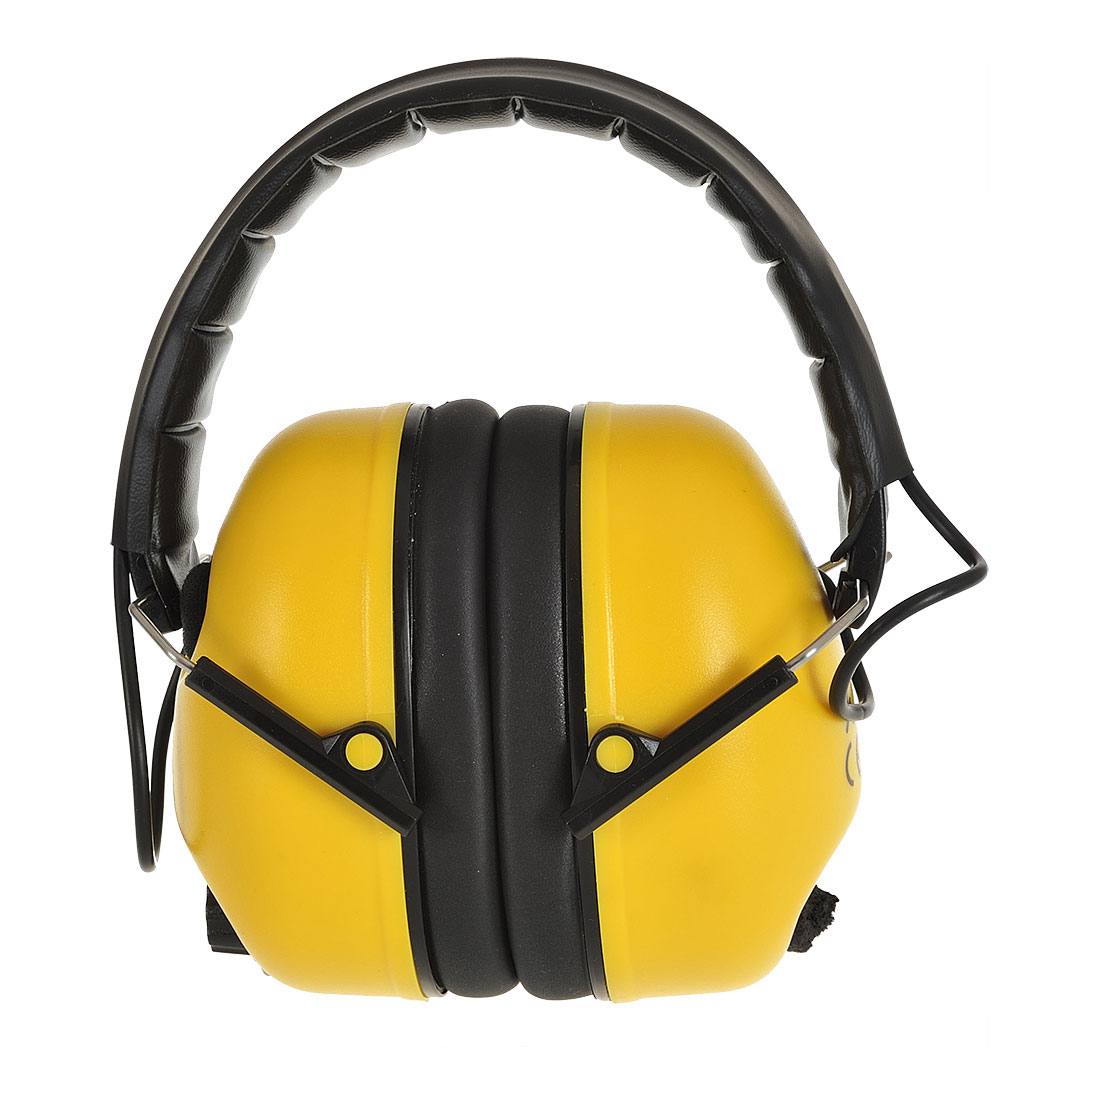 Portwest Clip-on Ear Protector Safety Protection Muffs Plugs Work Wear PW42 